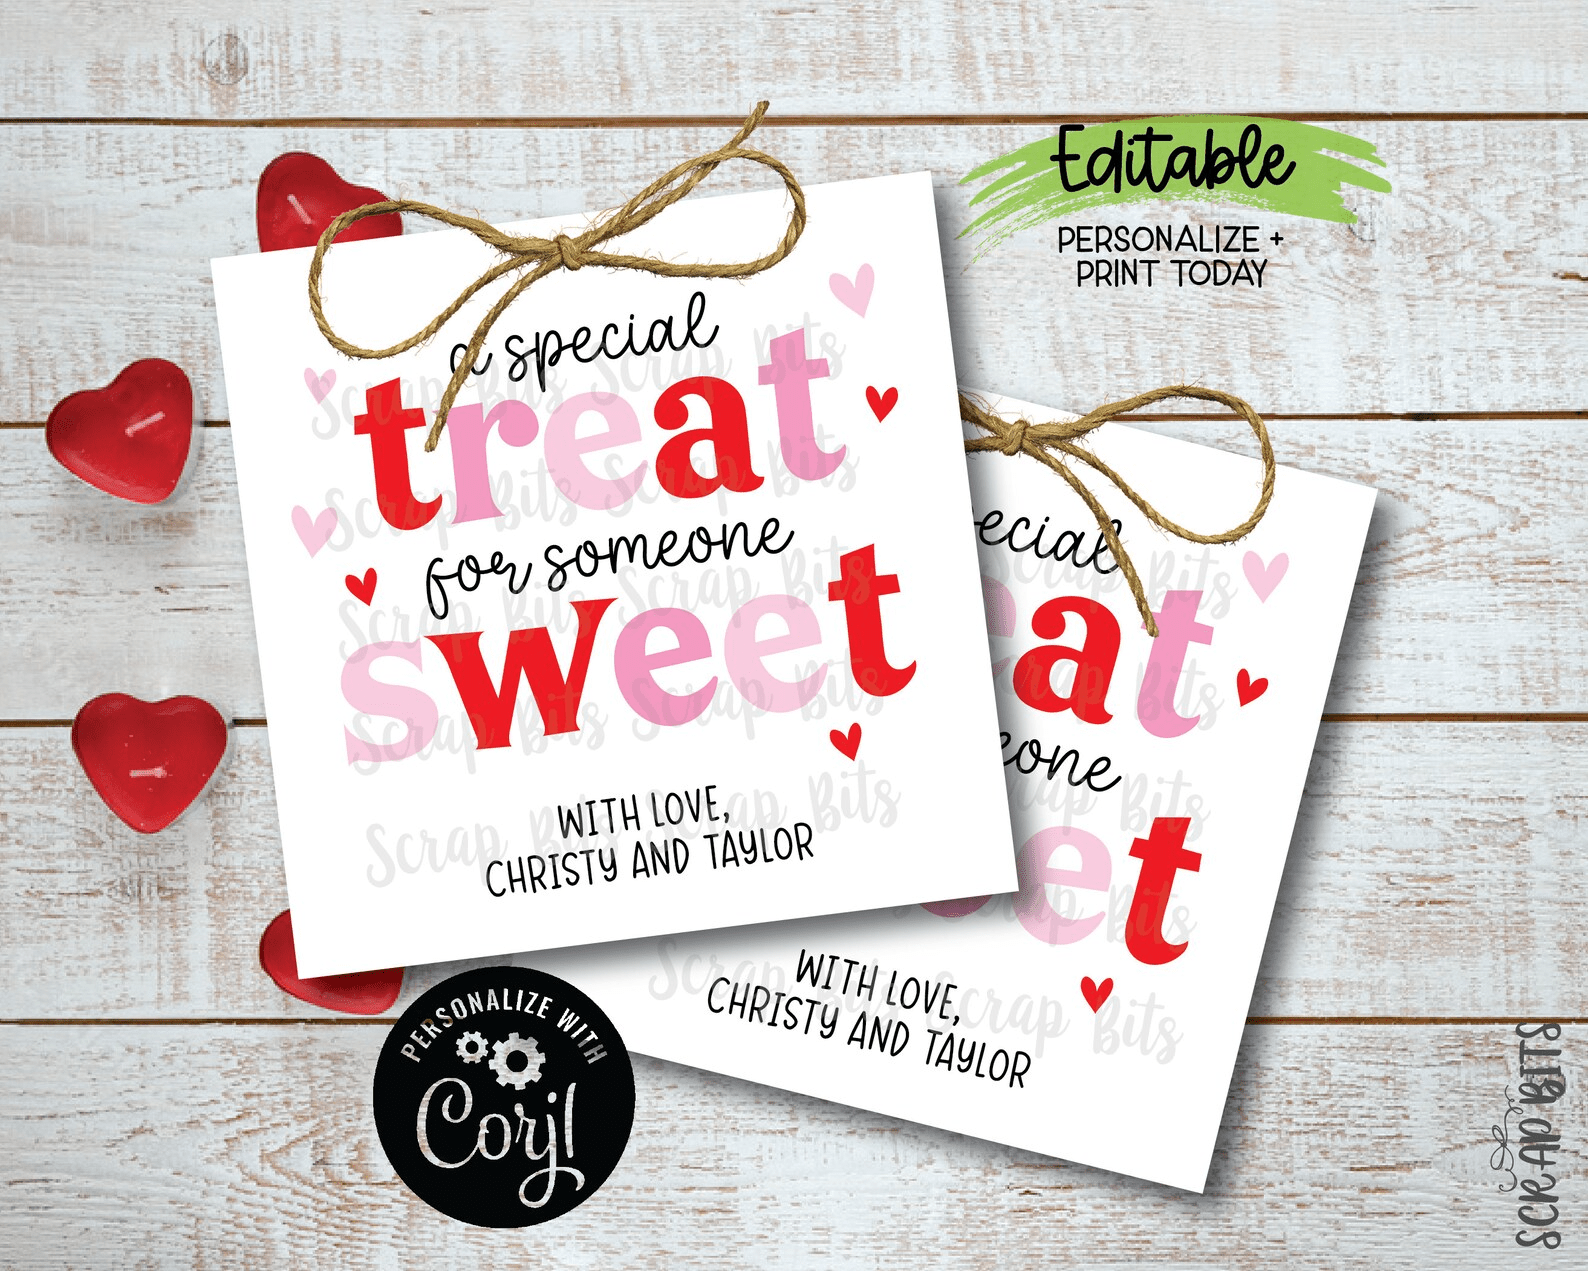 A Special Treat For Someone Sweet, Funky Lettering, Printable Valentine Tags, Instant Download Editable Template - Scrap Bits